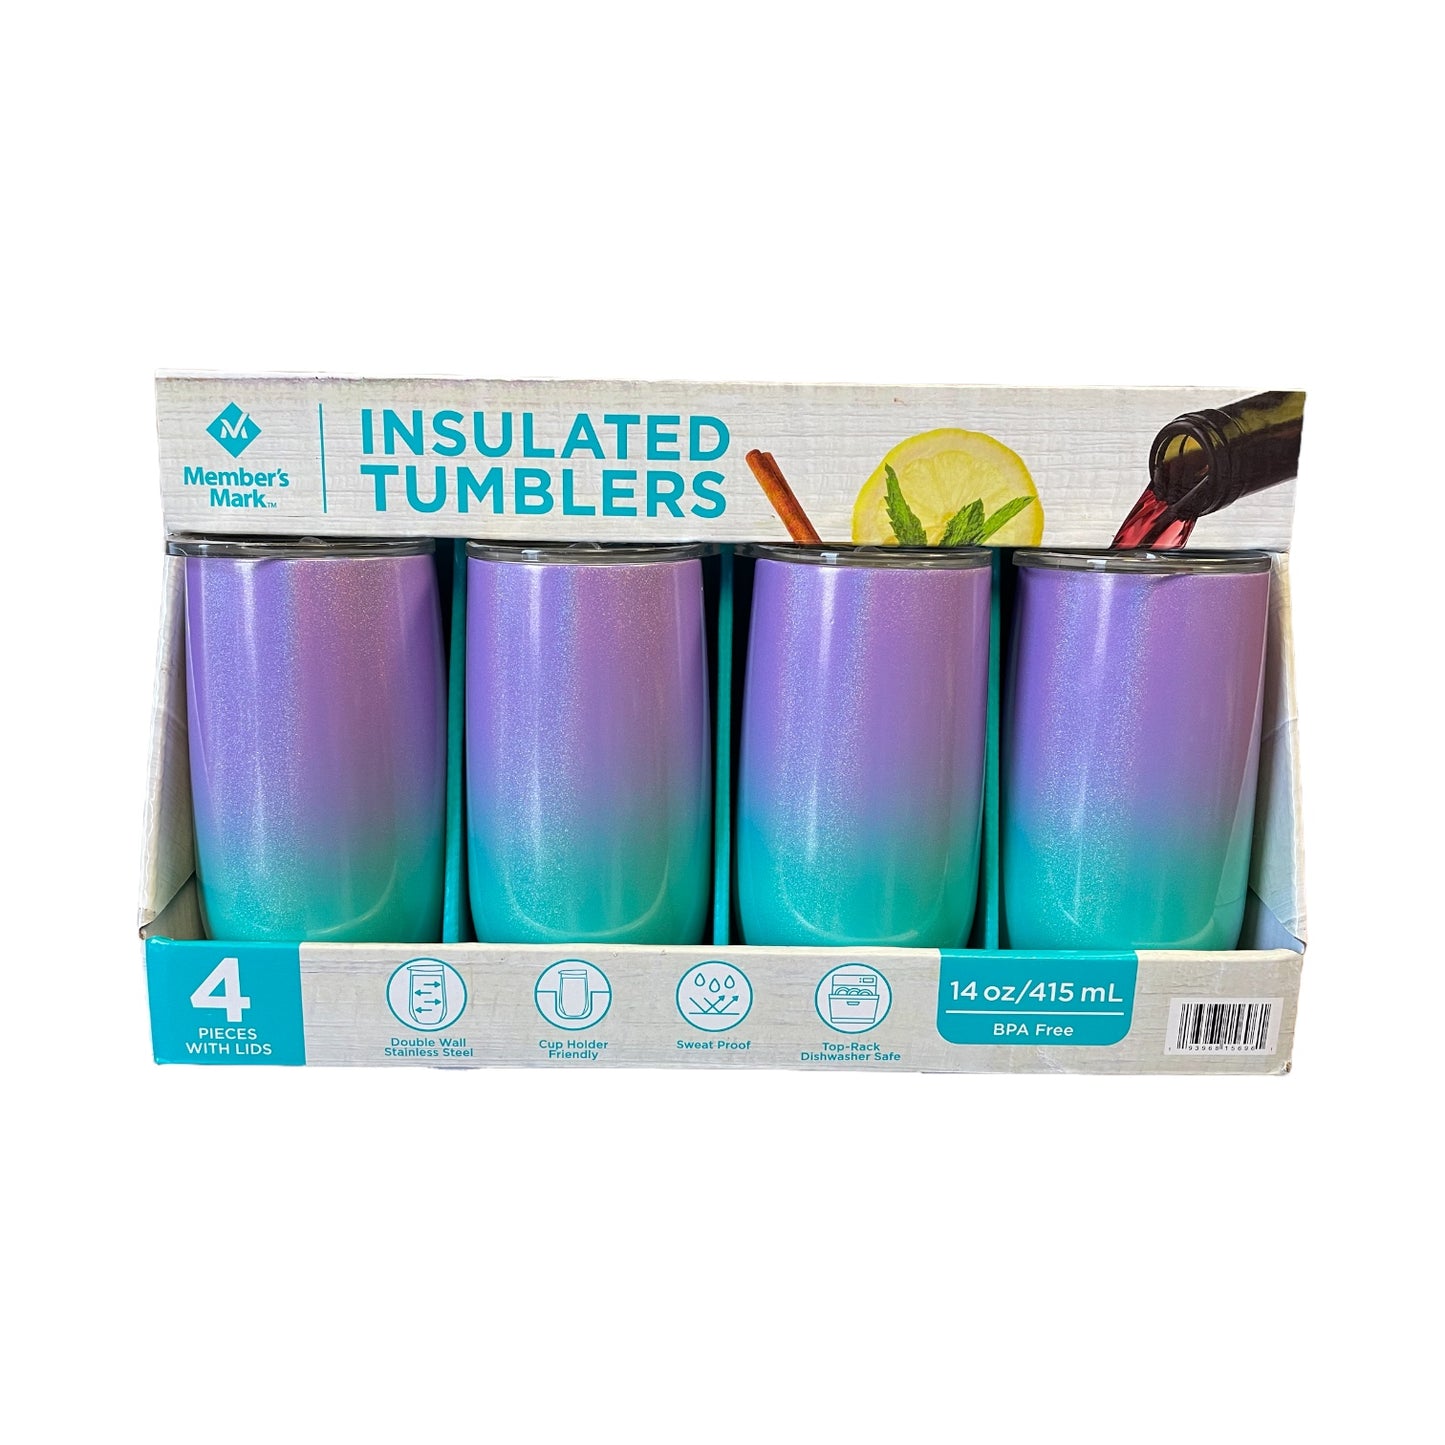 Member's Mark Insulated Tumblers with Lid, 14oz, Purple Blue Ombre (4 Pack)